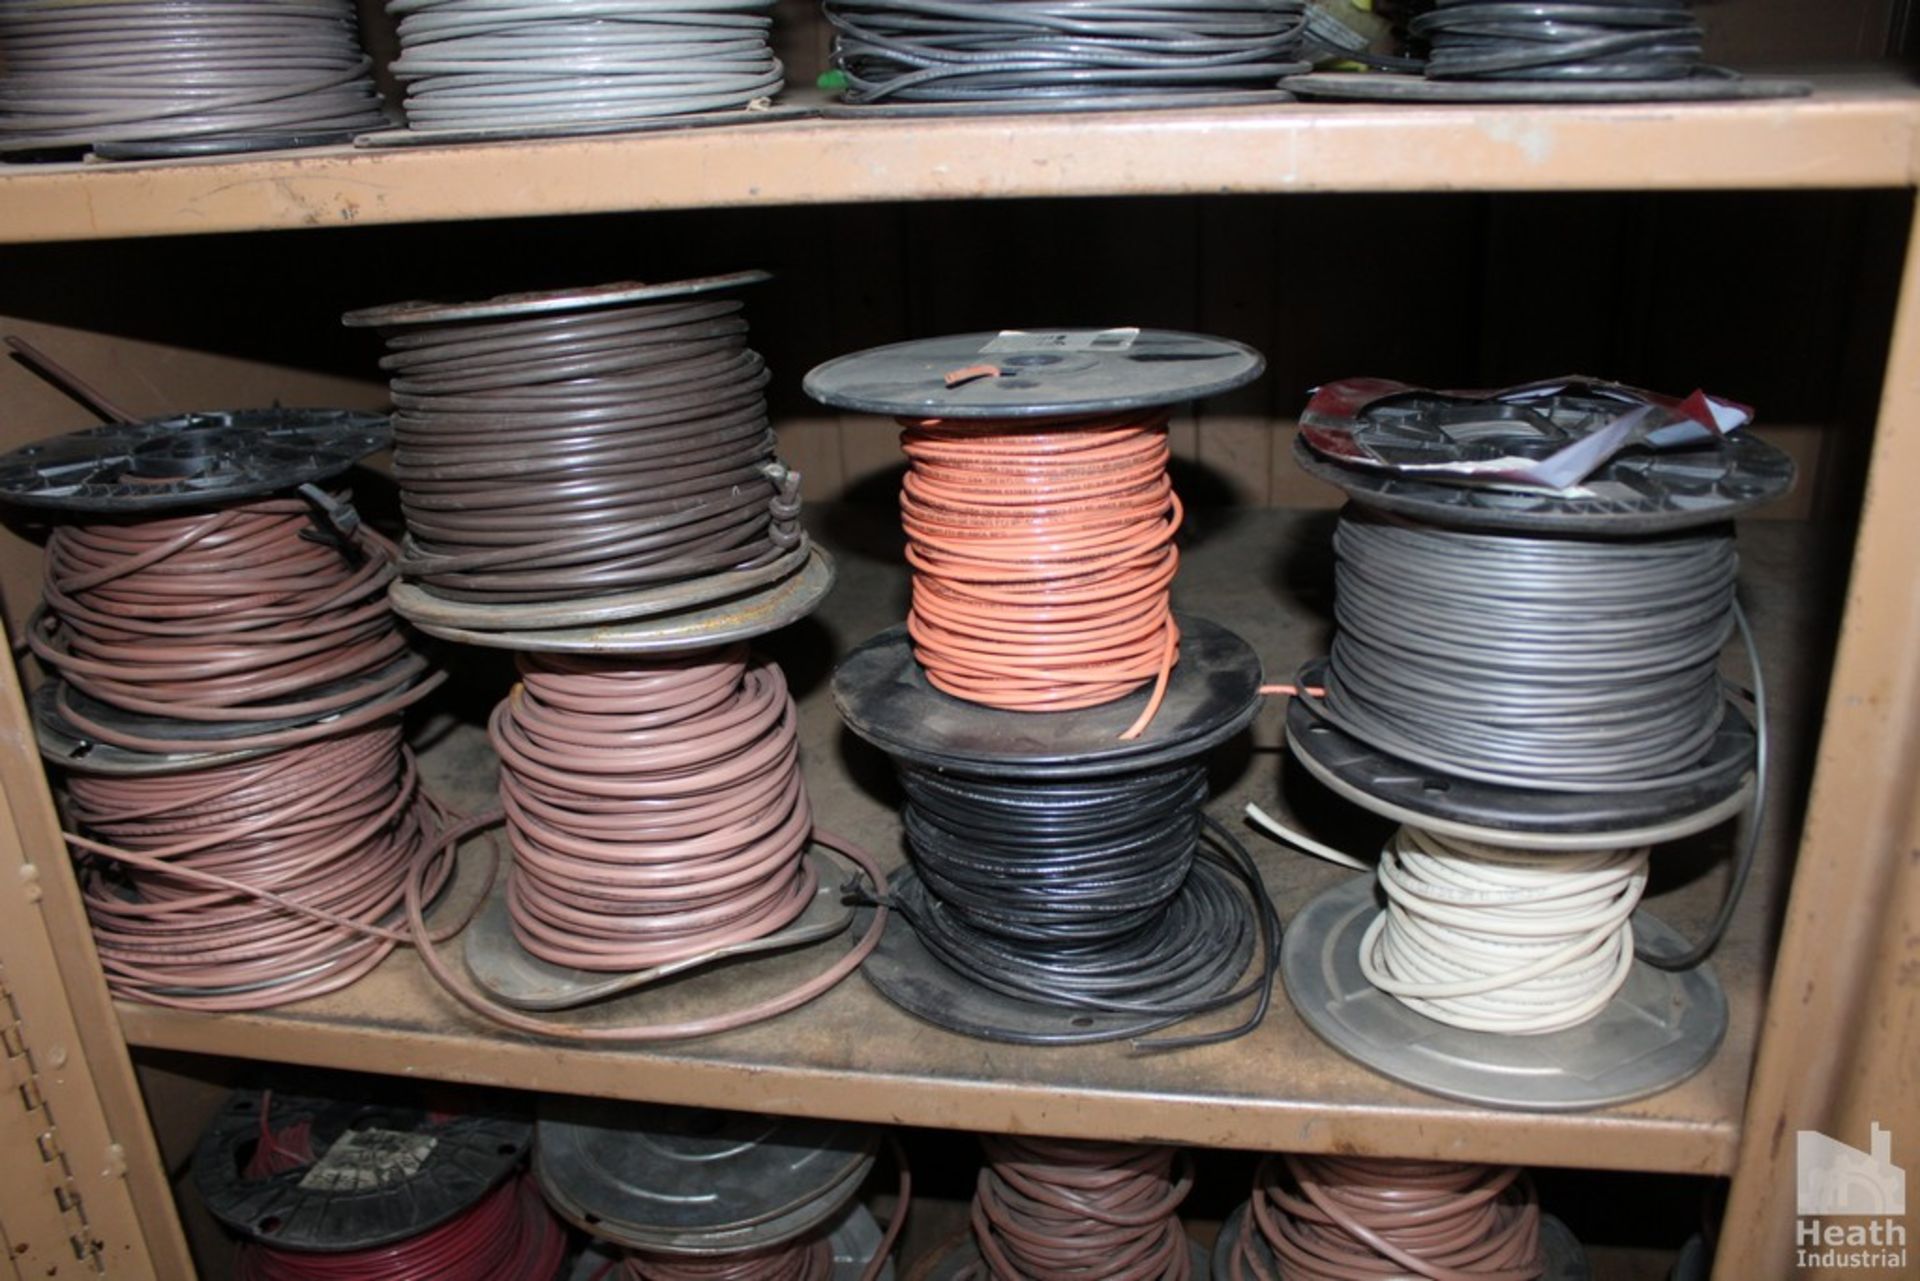 (16) SPOOLS ELECTRICAL WIRE ON SHELF - Image 2 of 3